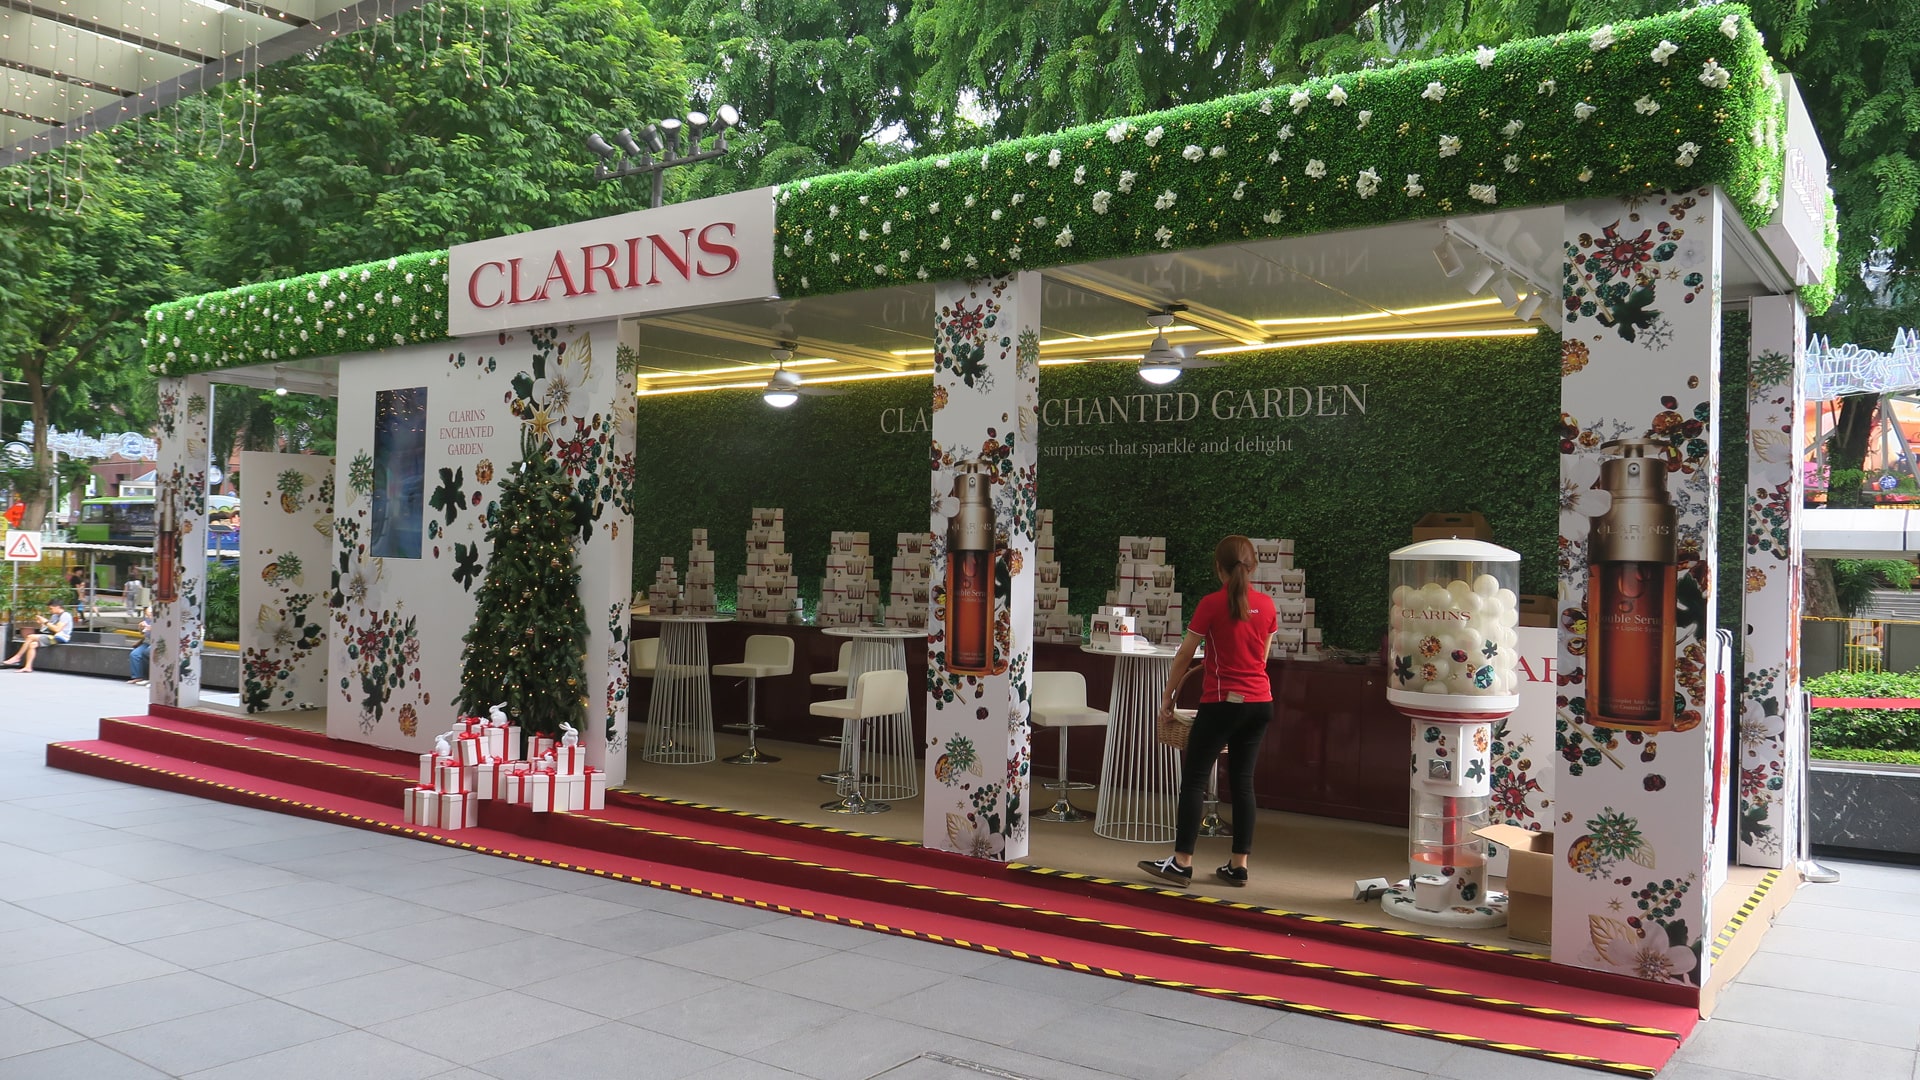 tsc_opt-images_tubelar-system_clarins-pop-up-beauty-store-1920x1080-02-min